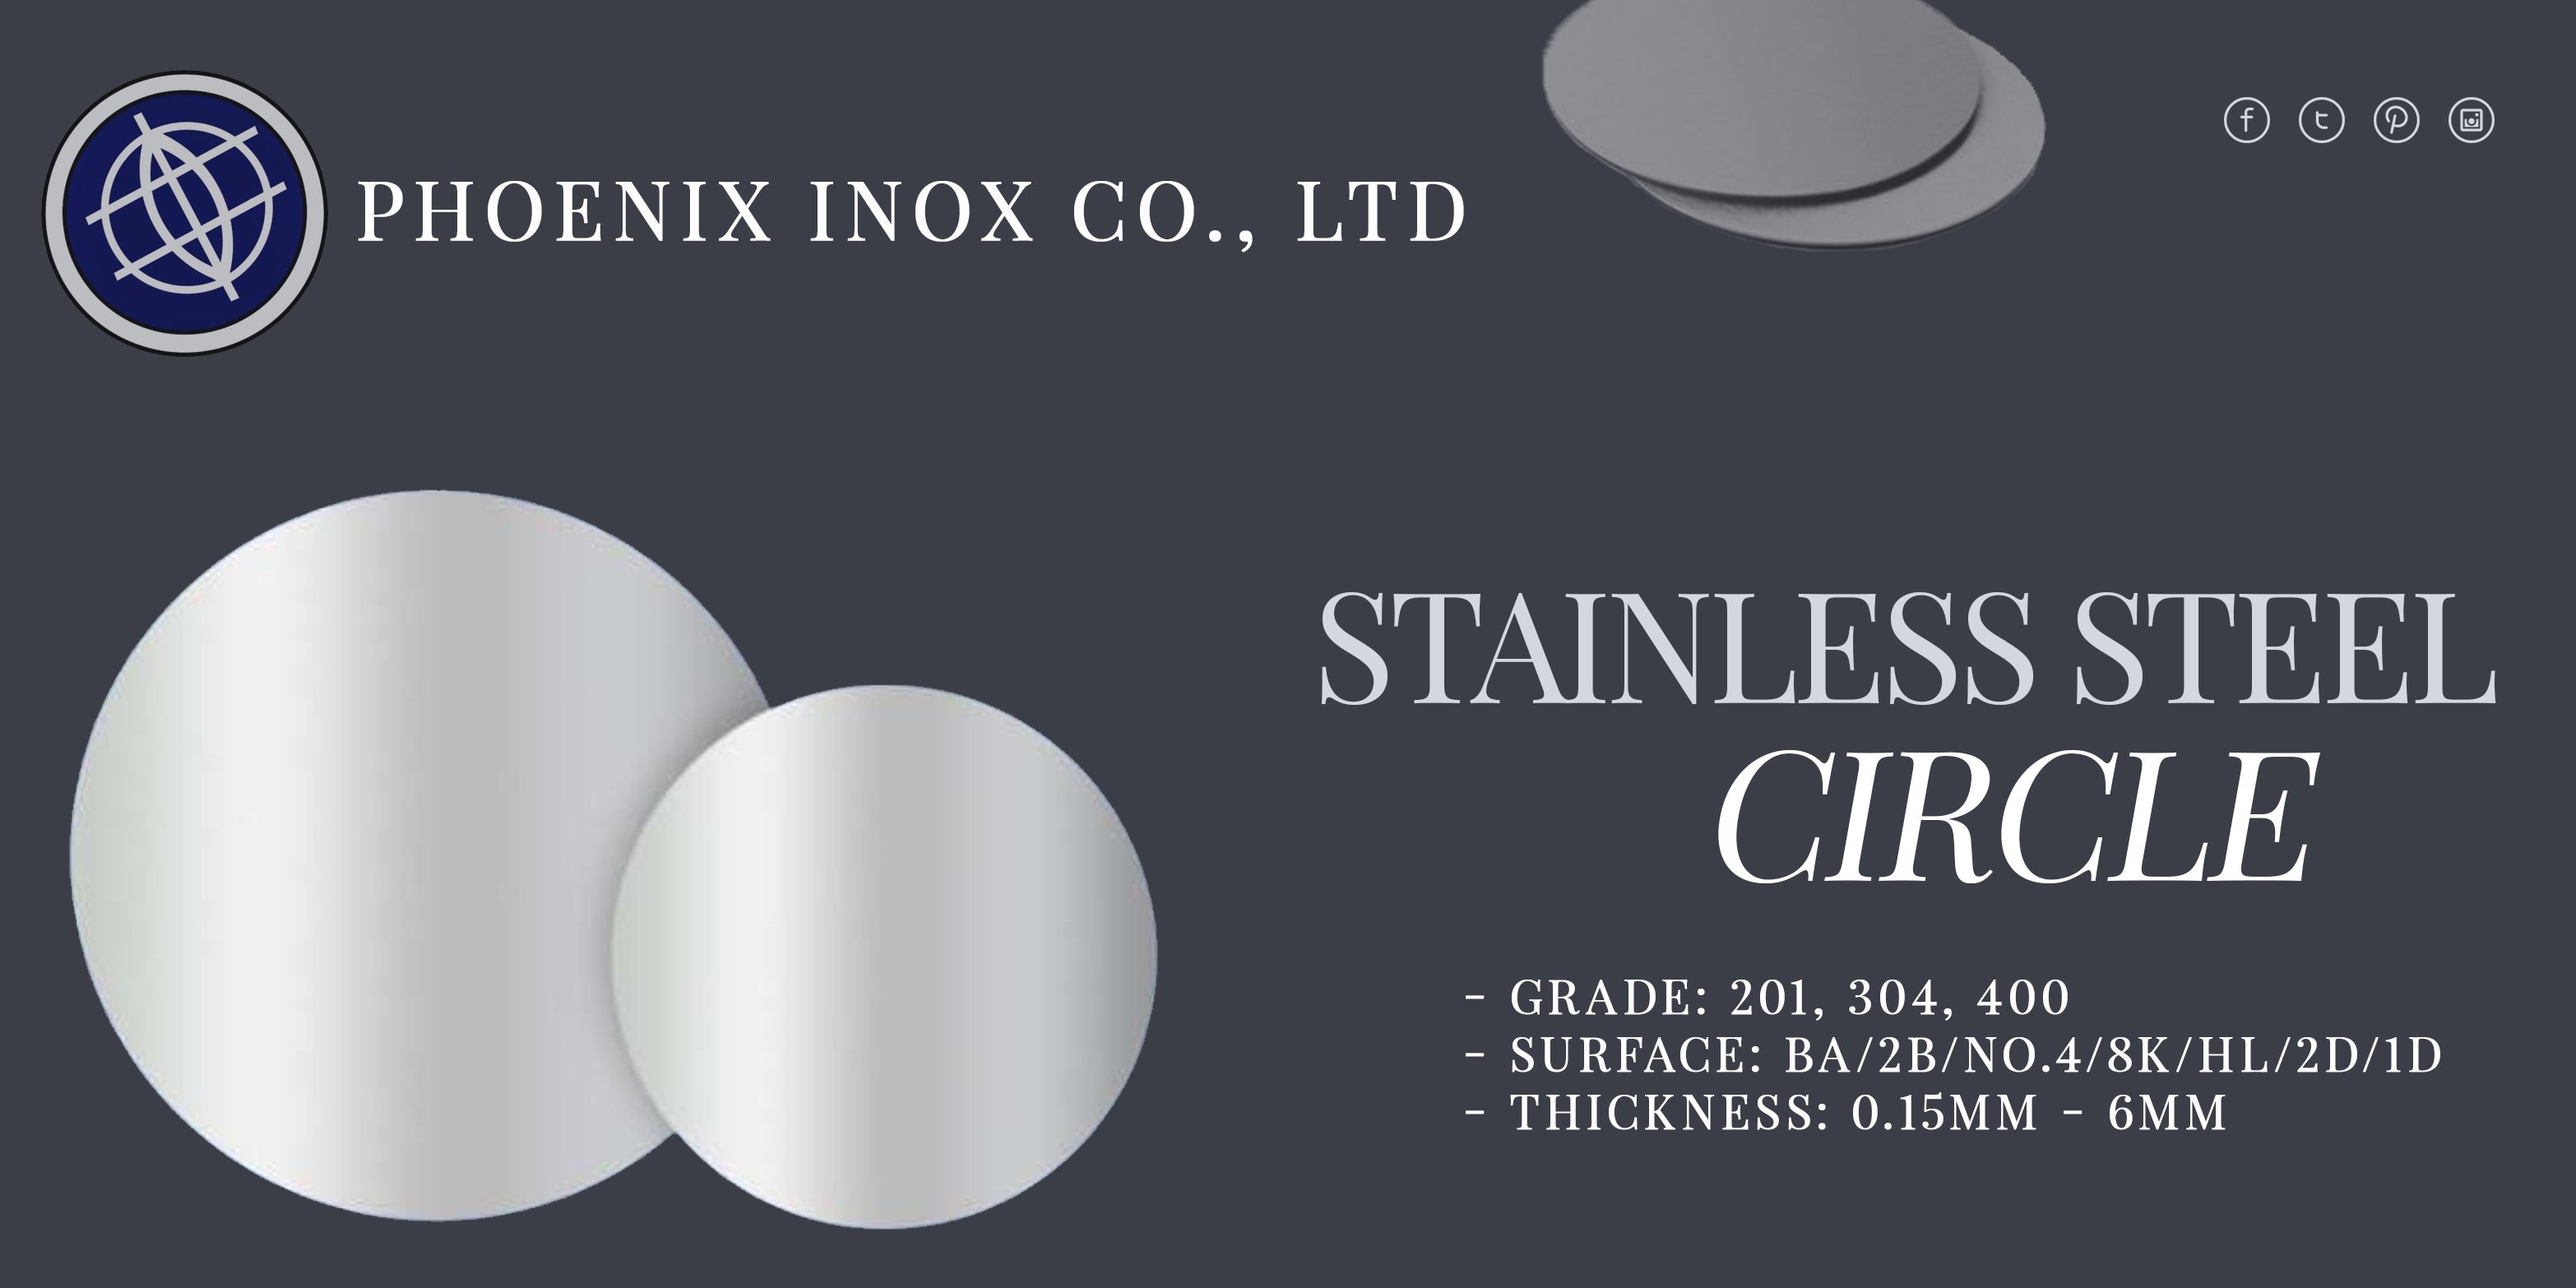 WE SPECIALIZE IN STAINLESS STEEL CIRCLES & PIPES